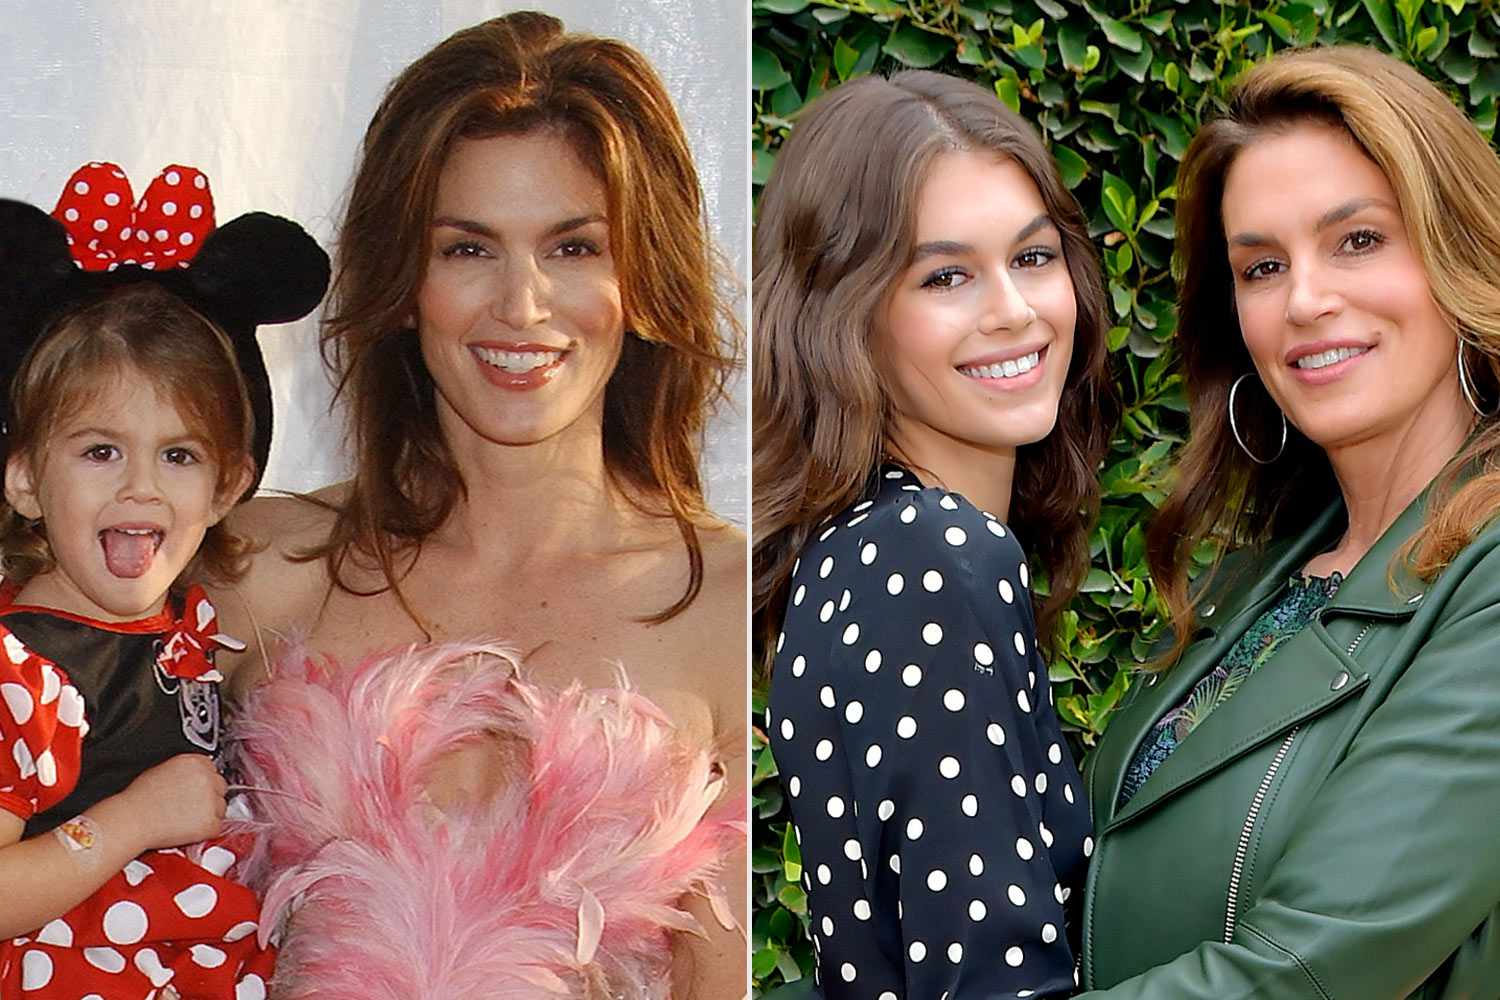 18-year-old Kaia Gerber looks just like her supermodel mom, Cindy Crawford.